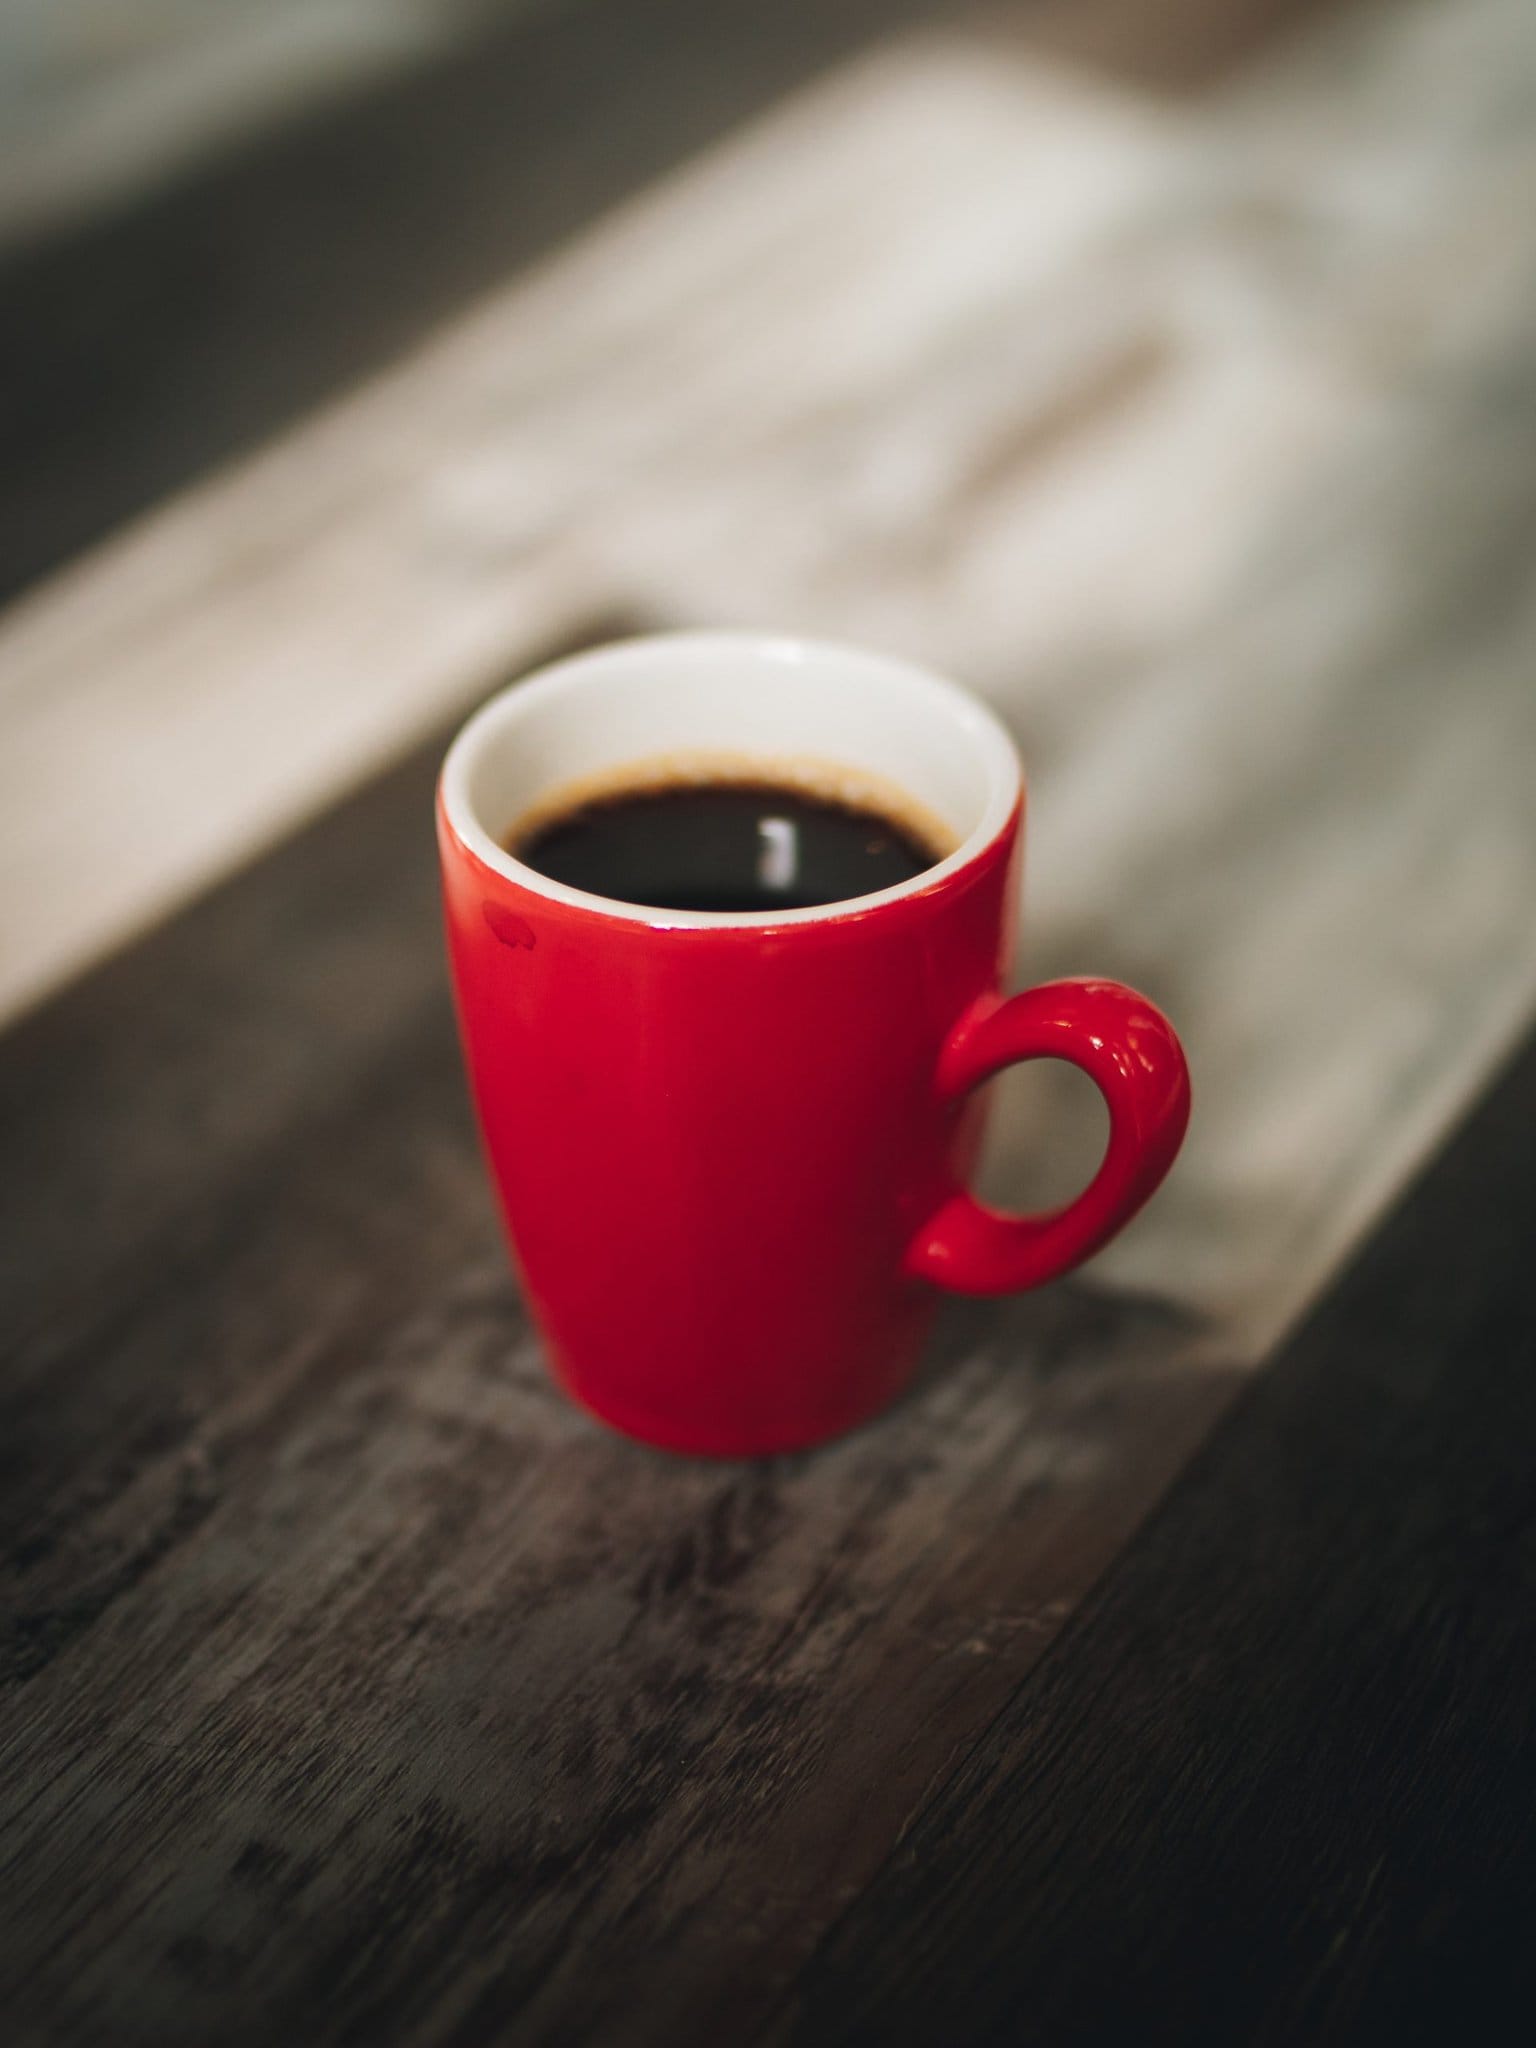 Red coffee cup VENTUREWRITE blog https://www.pexels.com/photo/selective-focus-photography-red-cup-of-coffee-2113129/